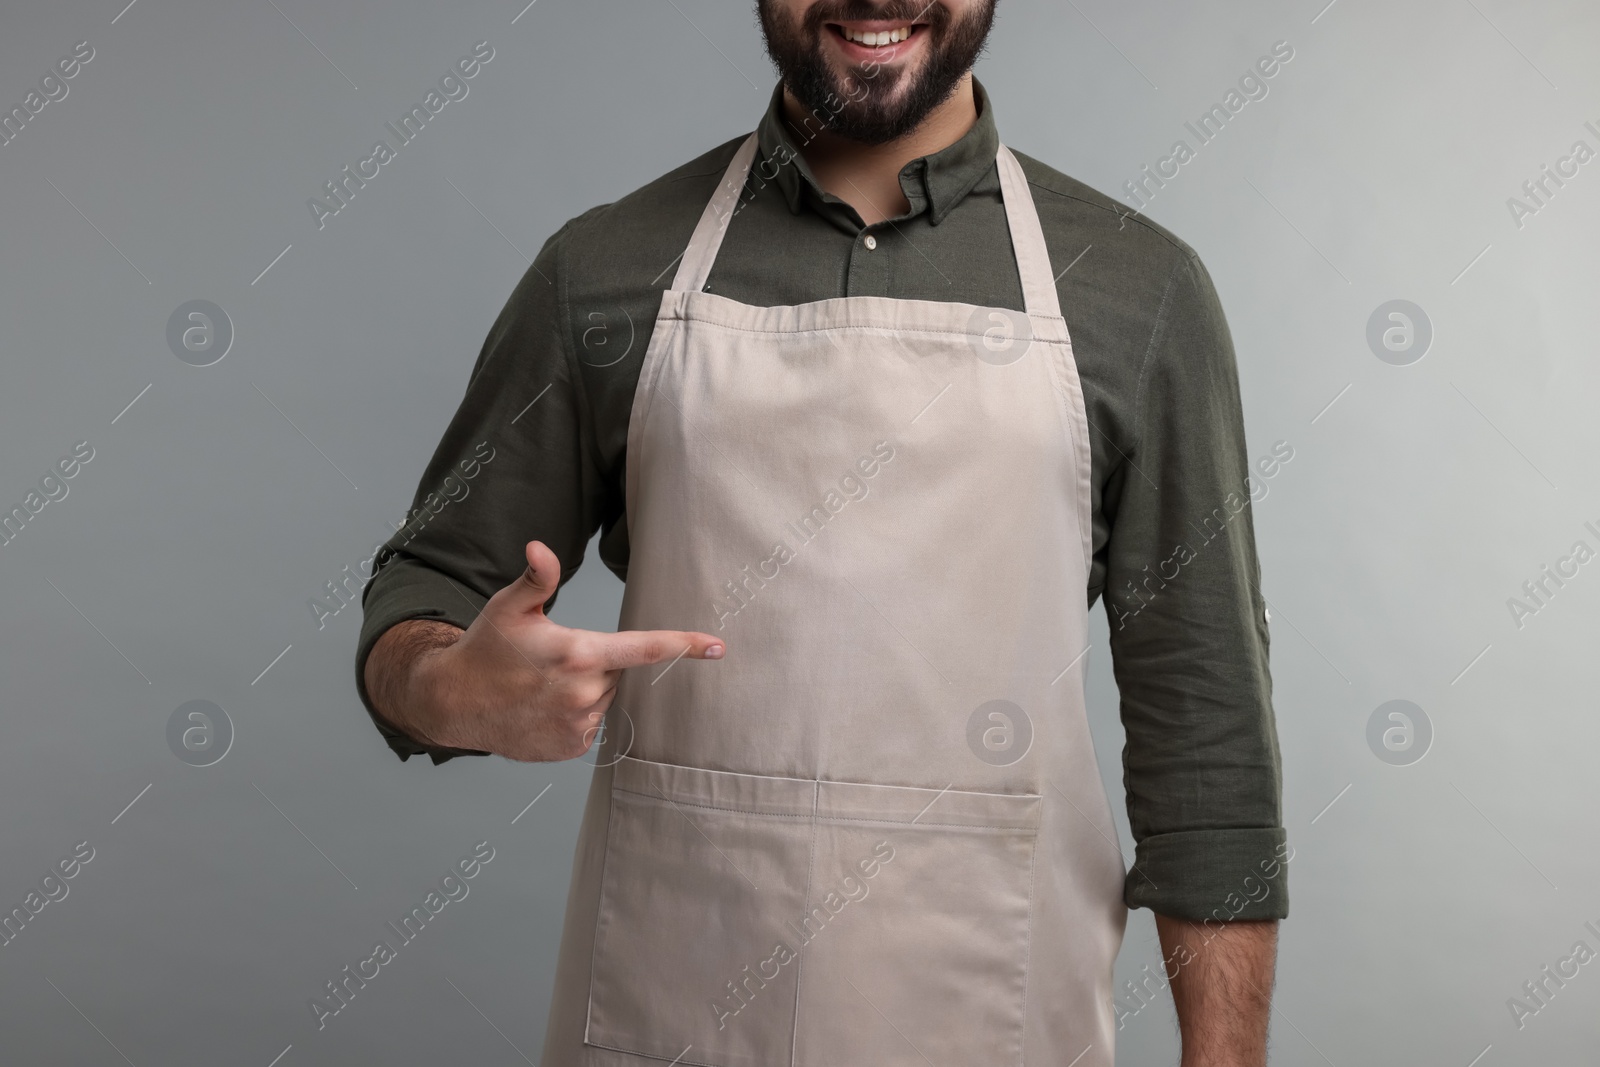 Photo of Smiling man pointing at kitchen apron on grey background, closeup. Mockup for design